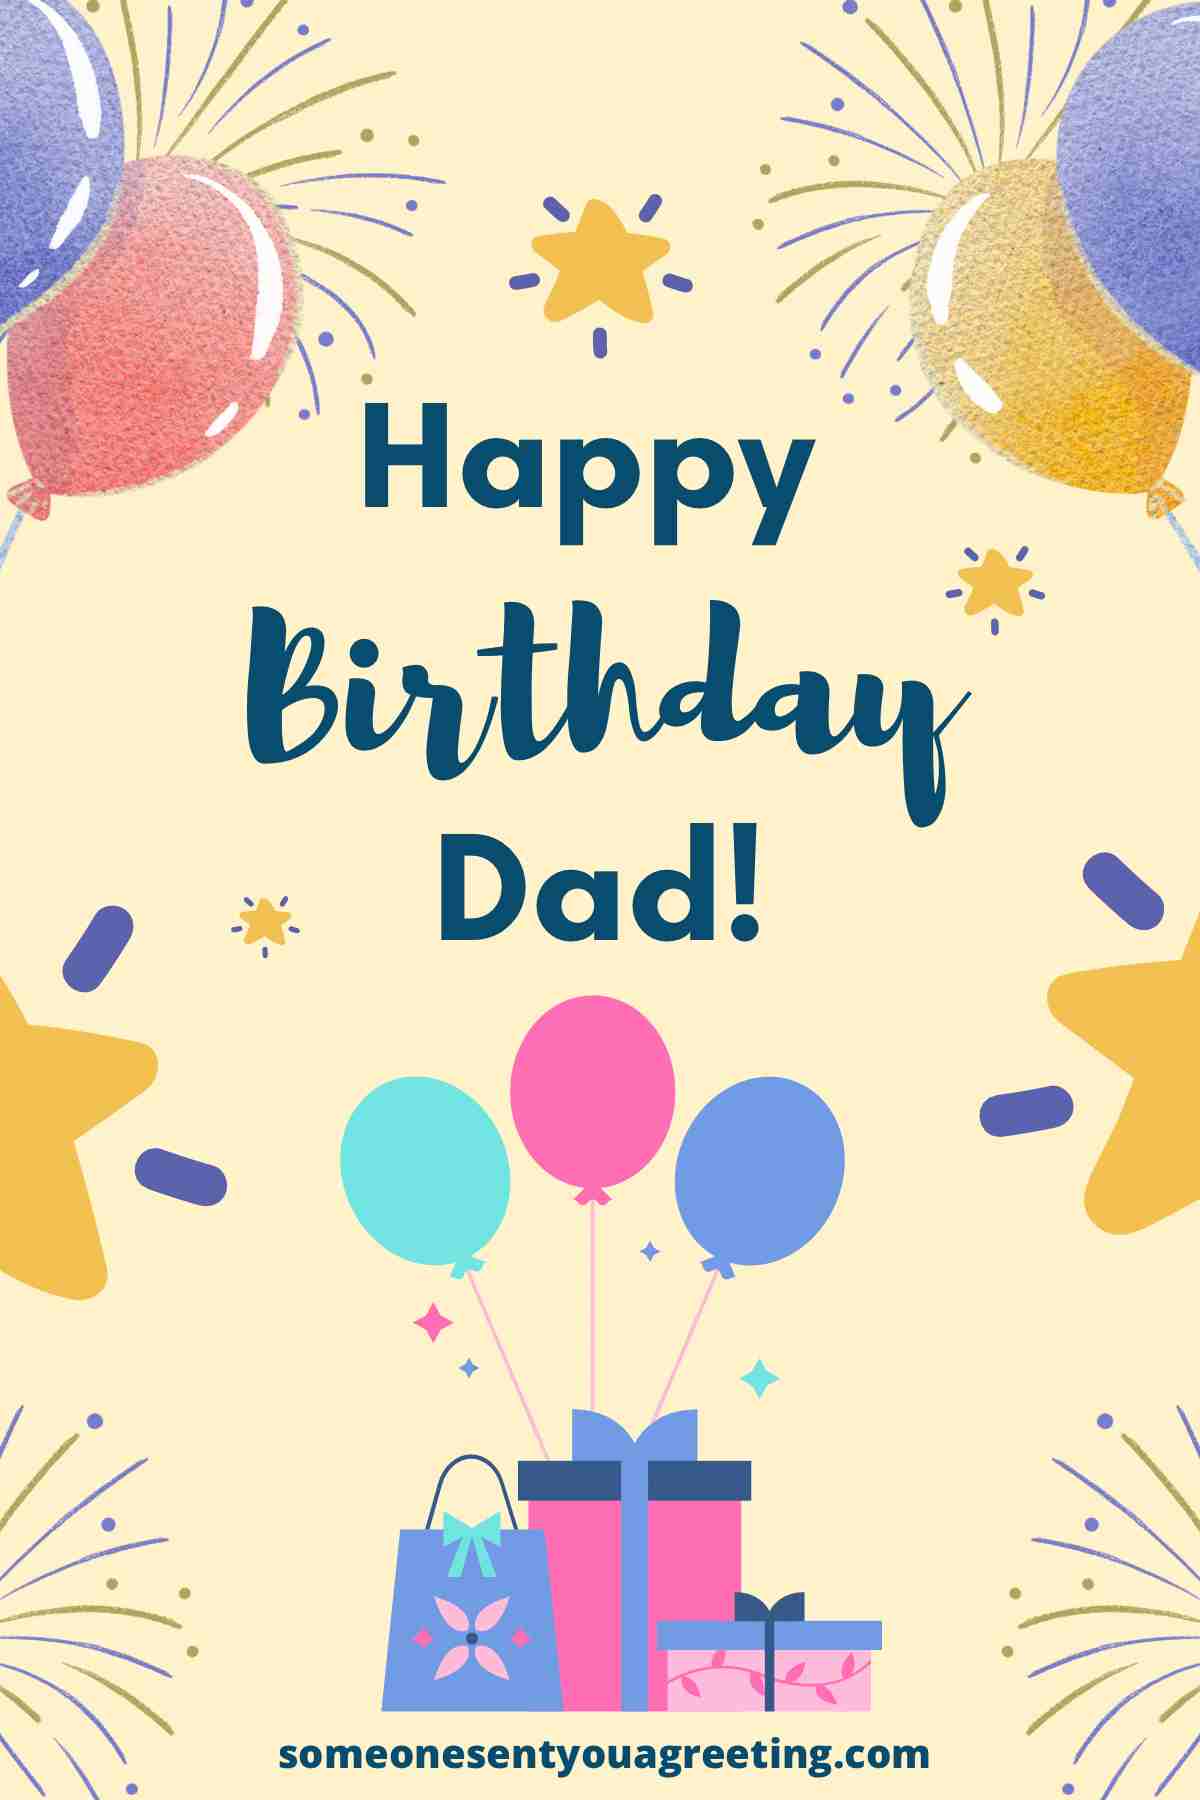 birthday message for dad